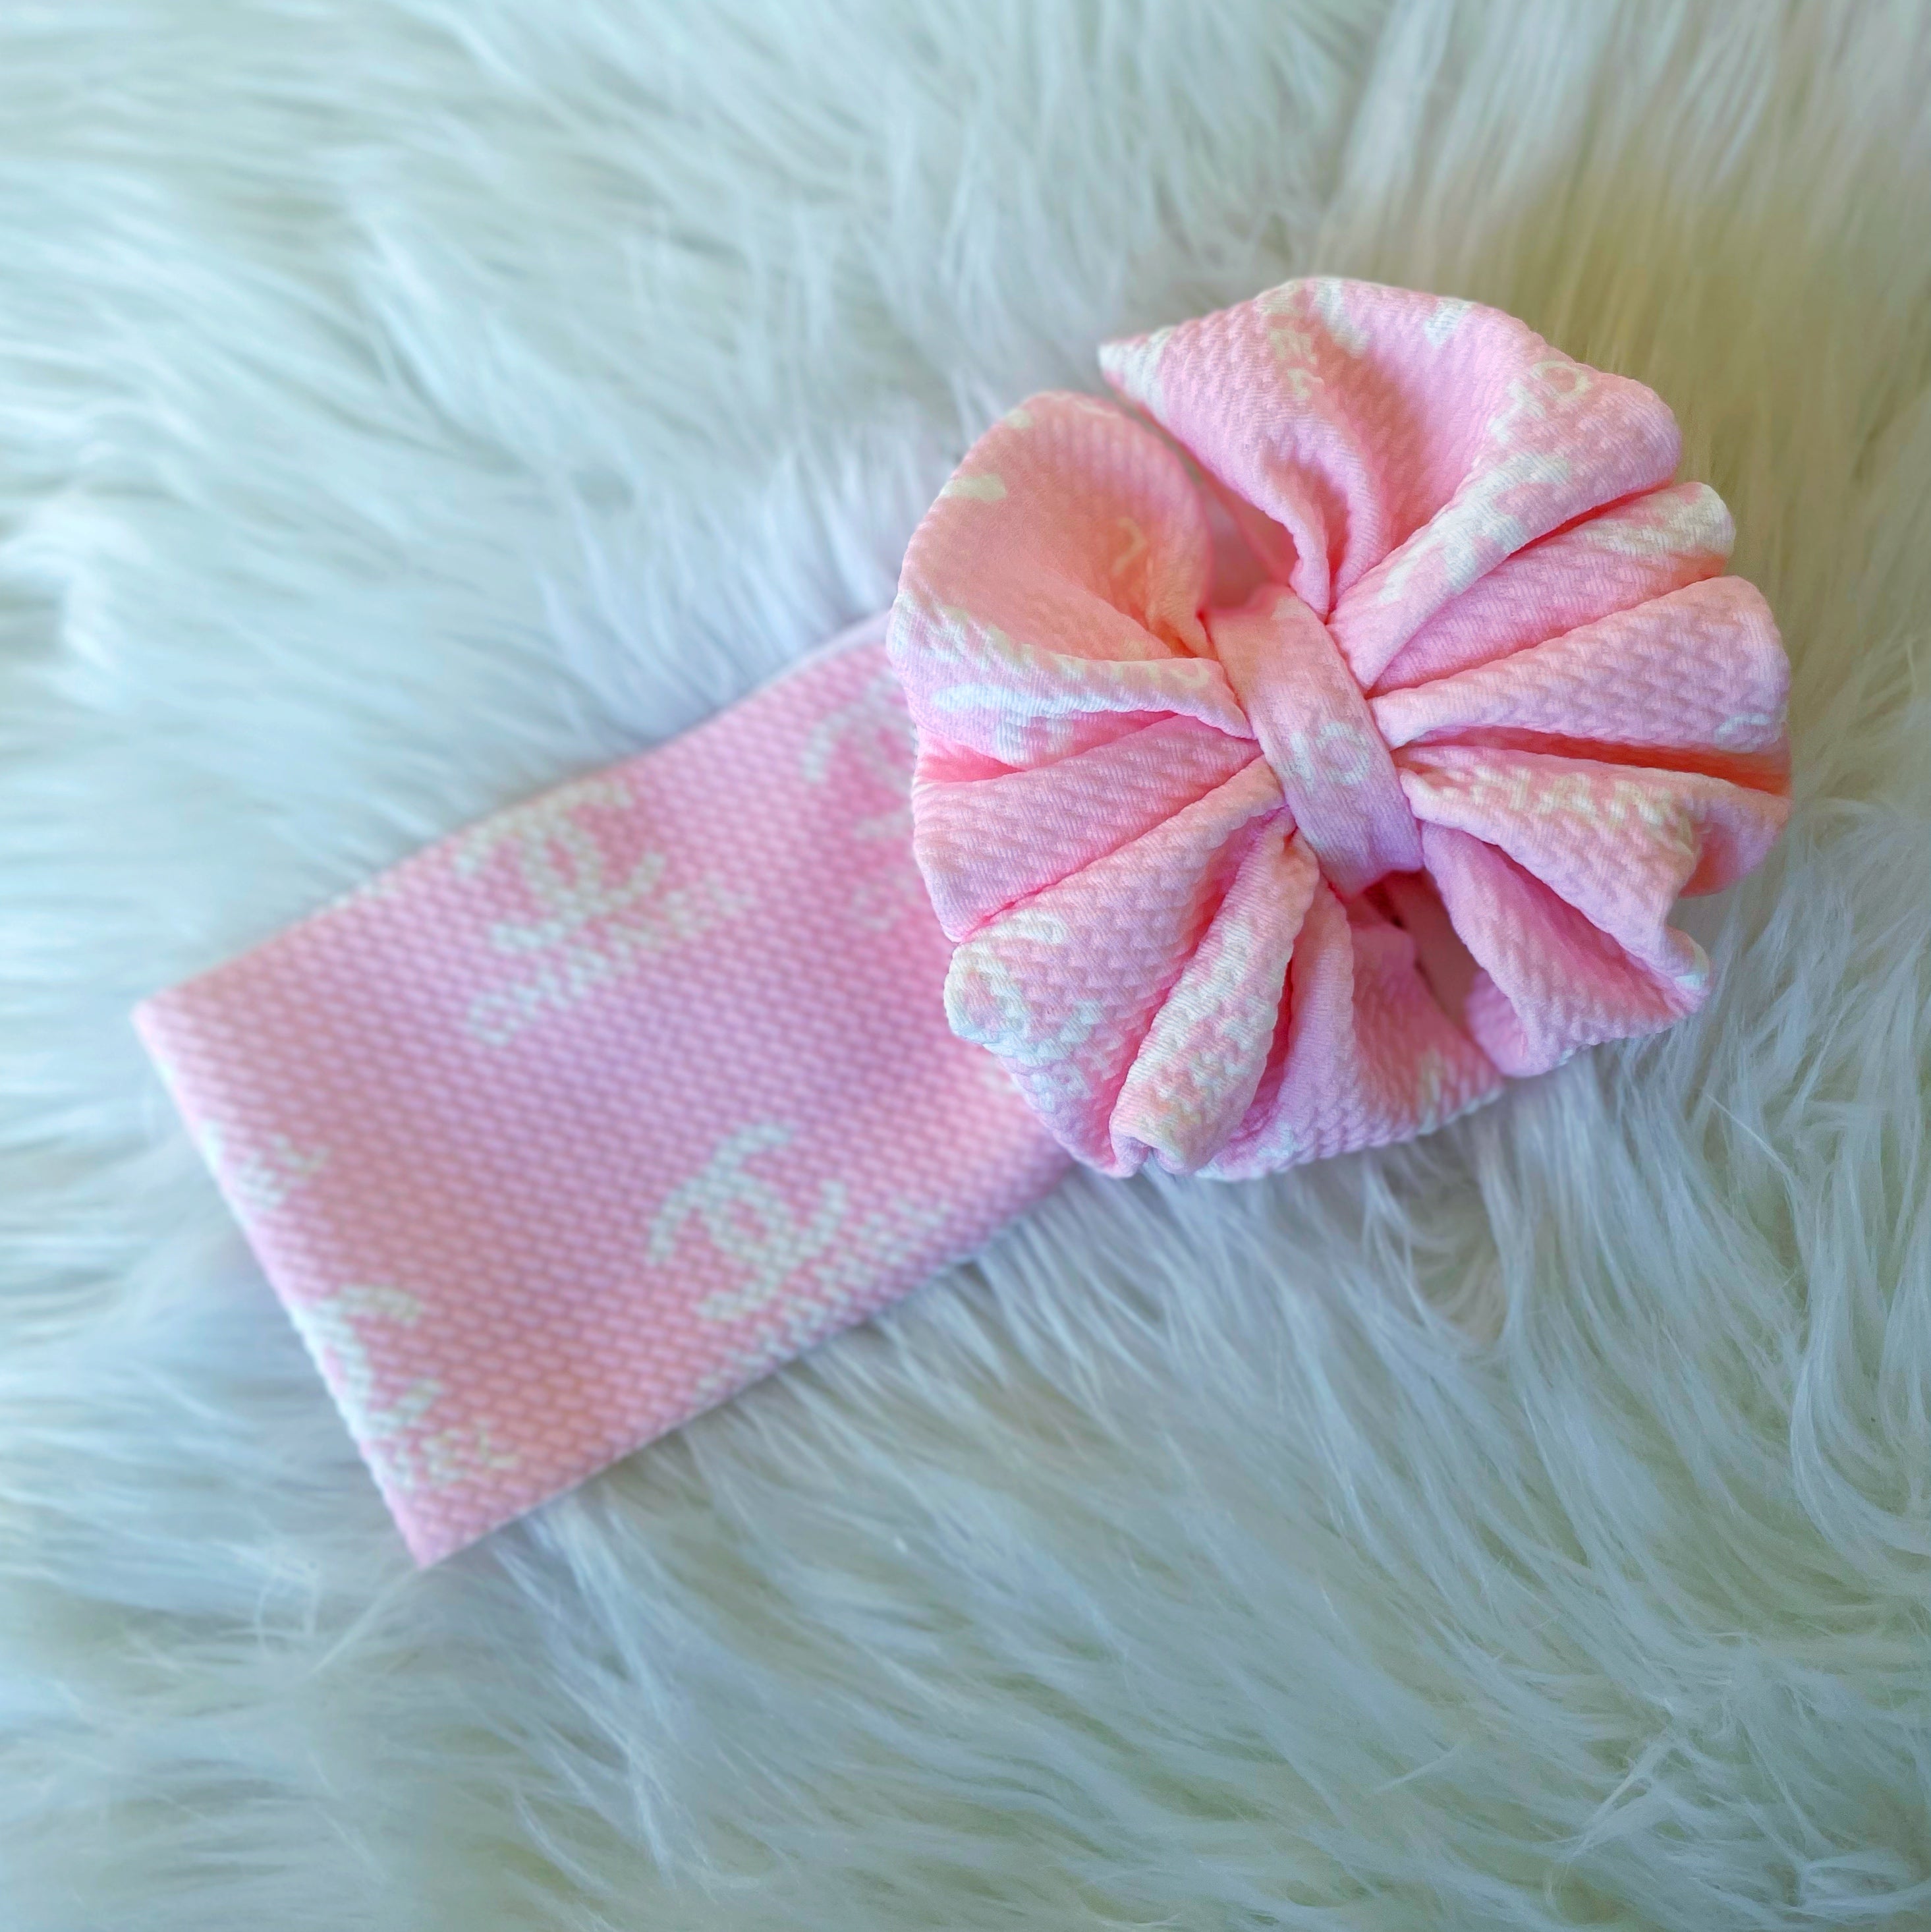 💥NEW💥 CHANEL bows 3” - Best Dressed Tutu's and Bows